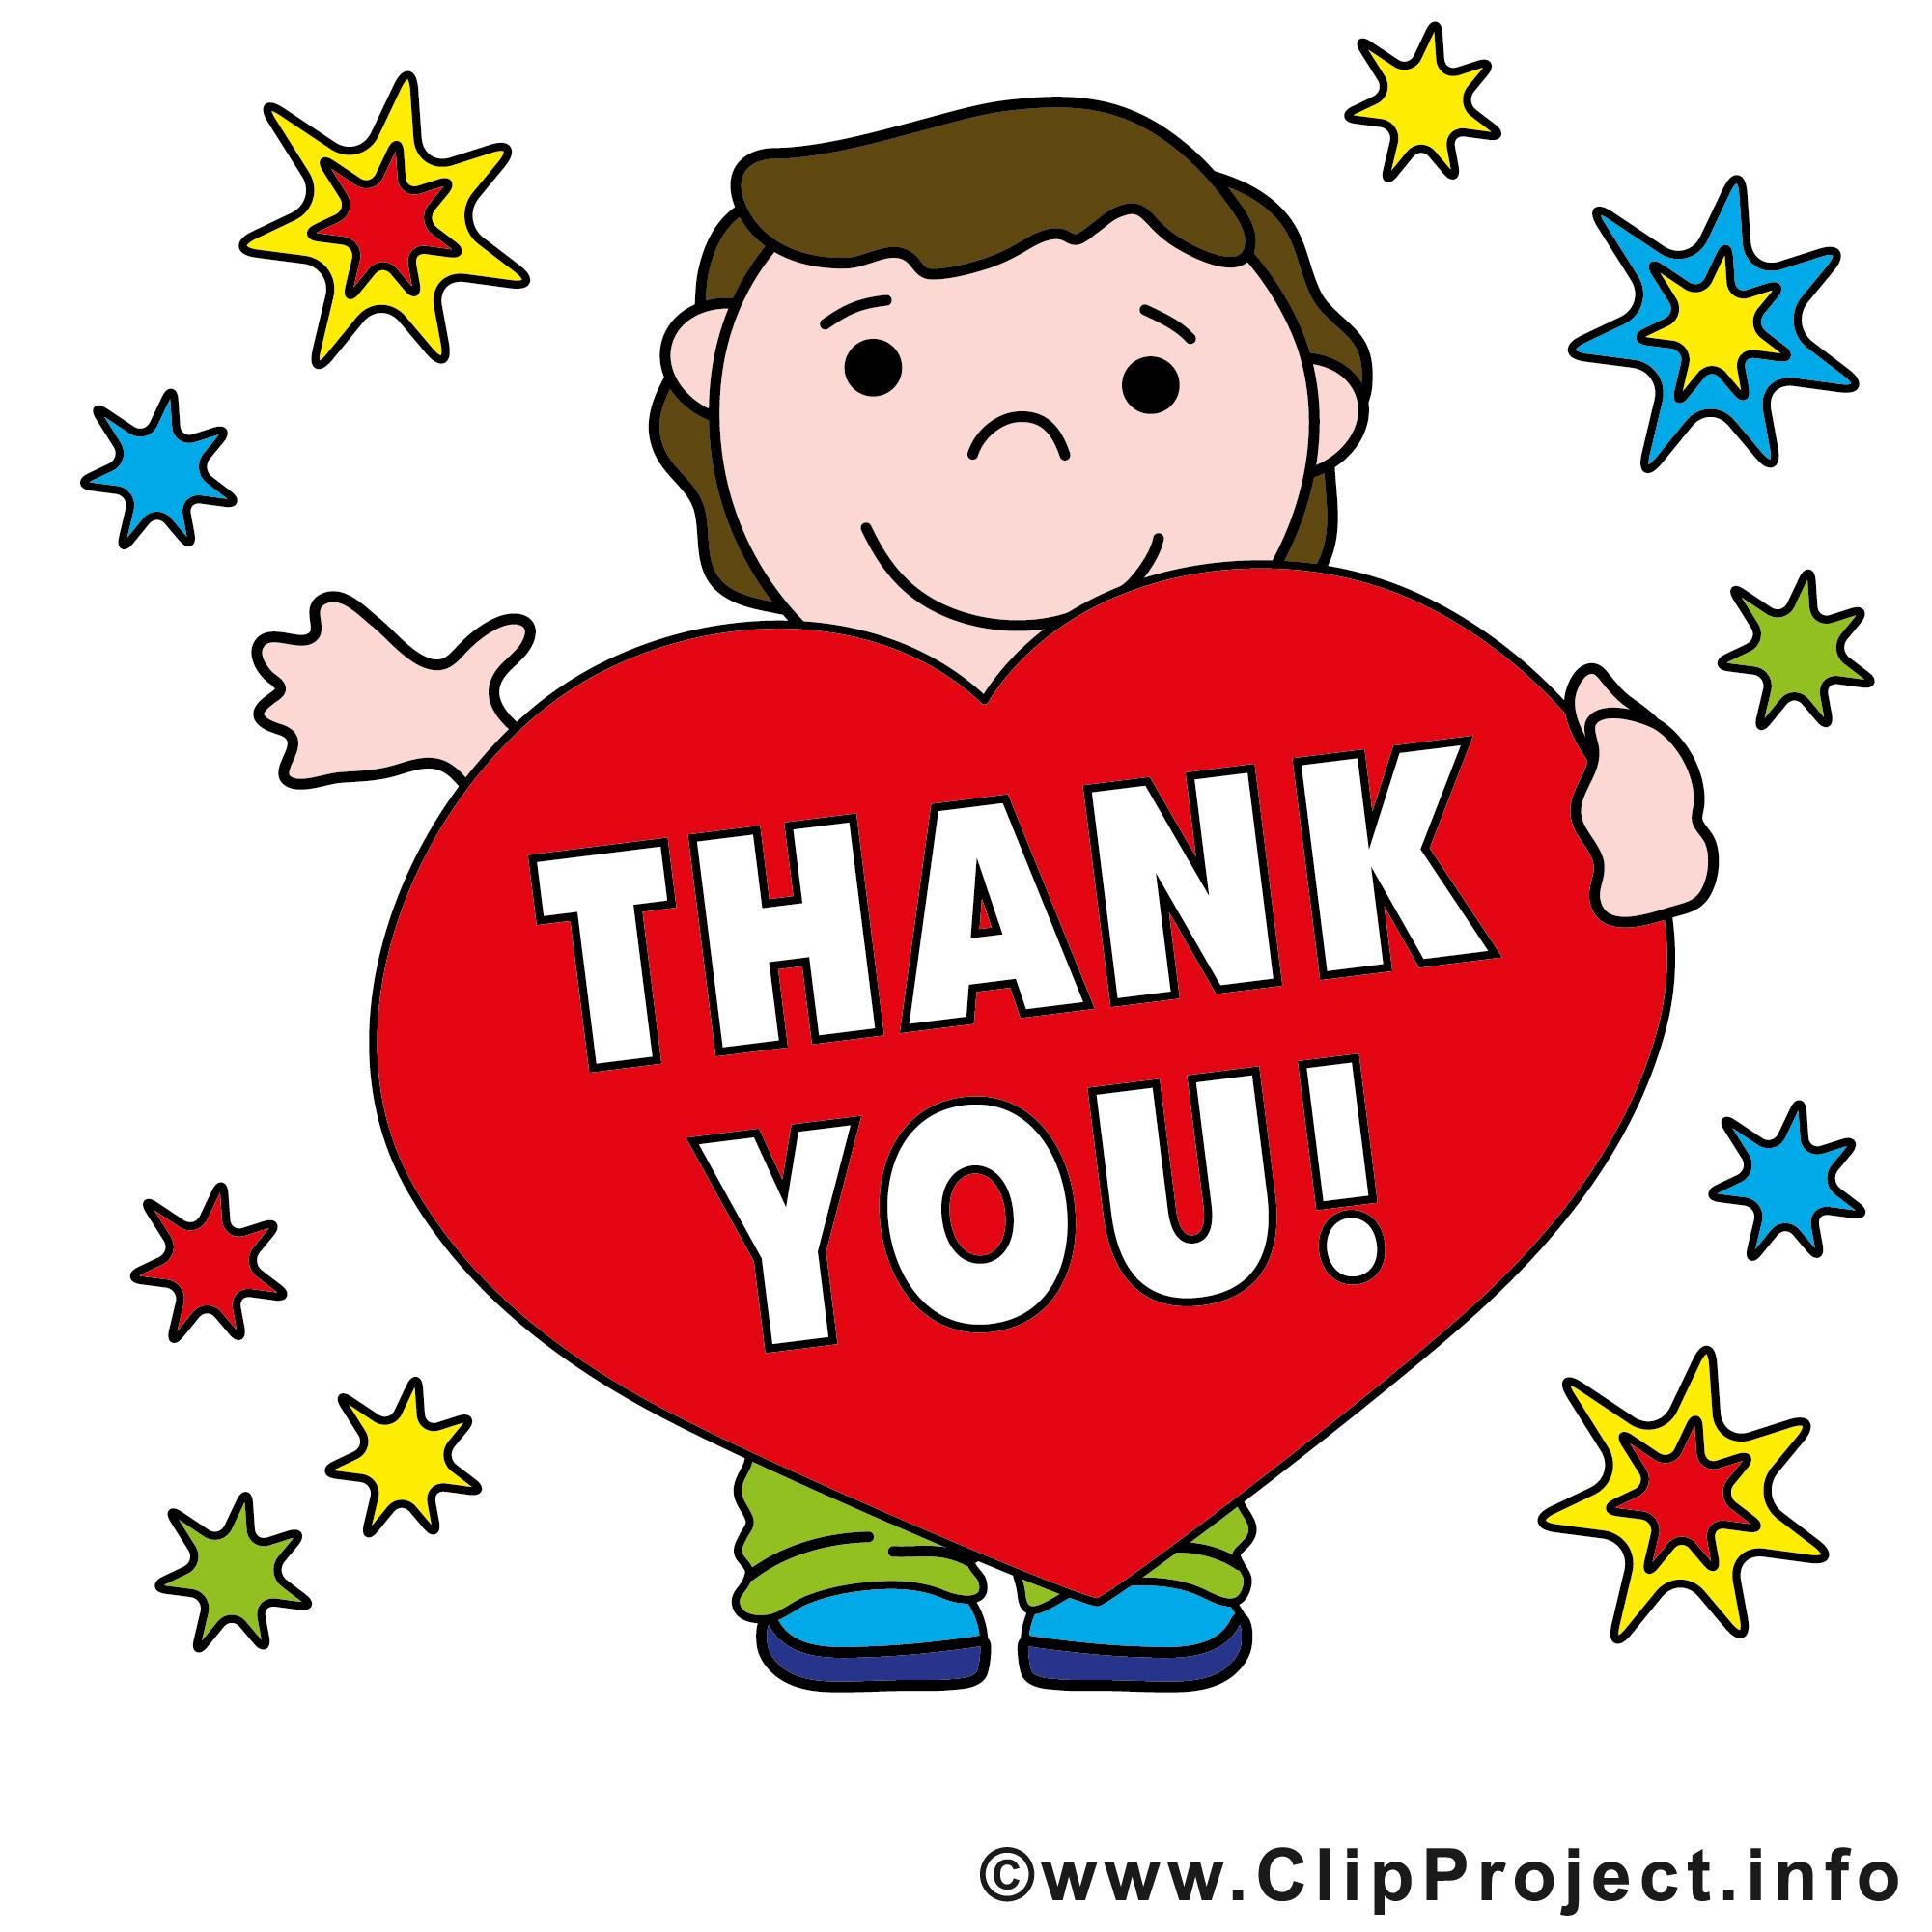 thank you clipart free clipart panda free clipart images 5KwAxs clipart